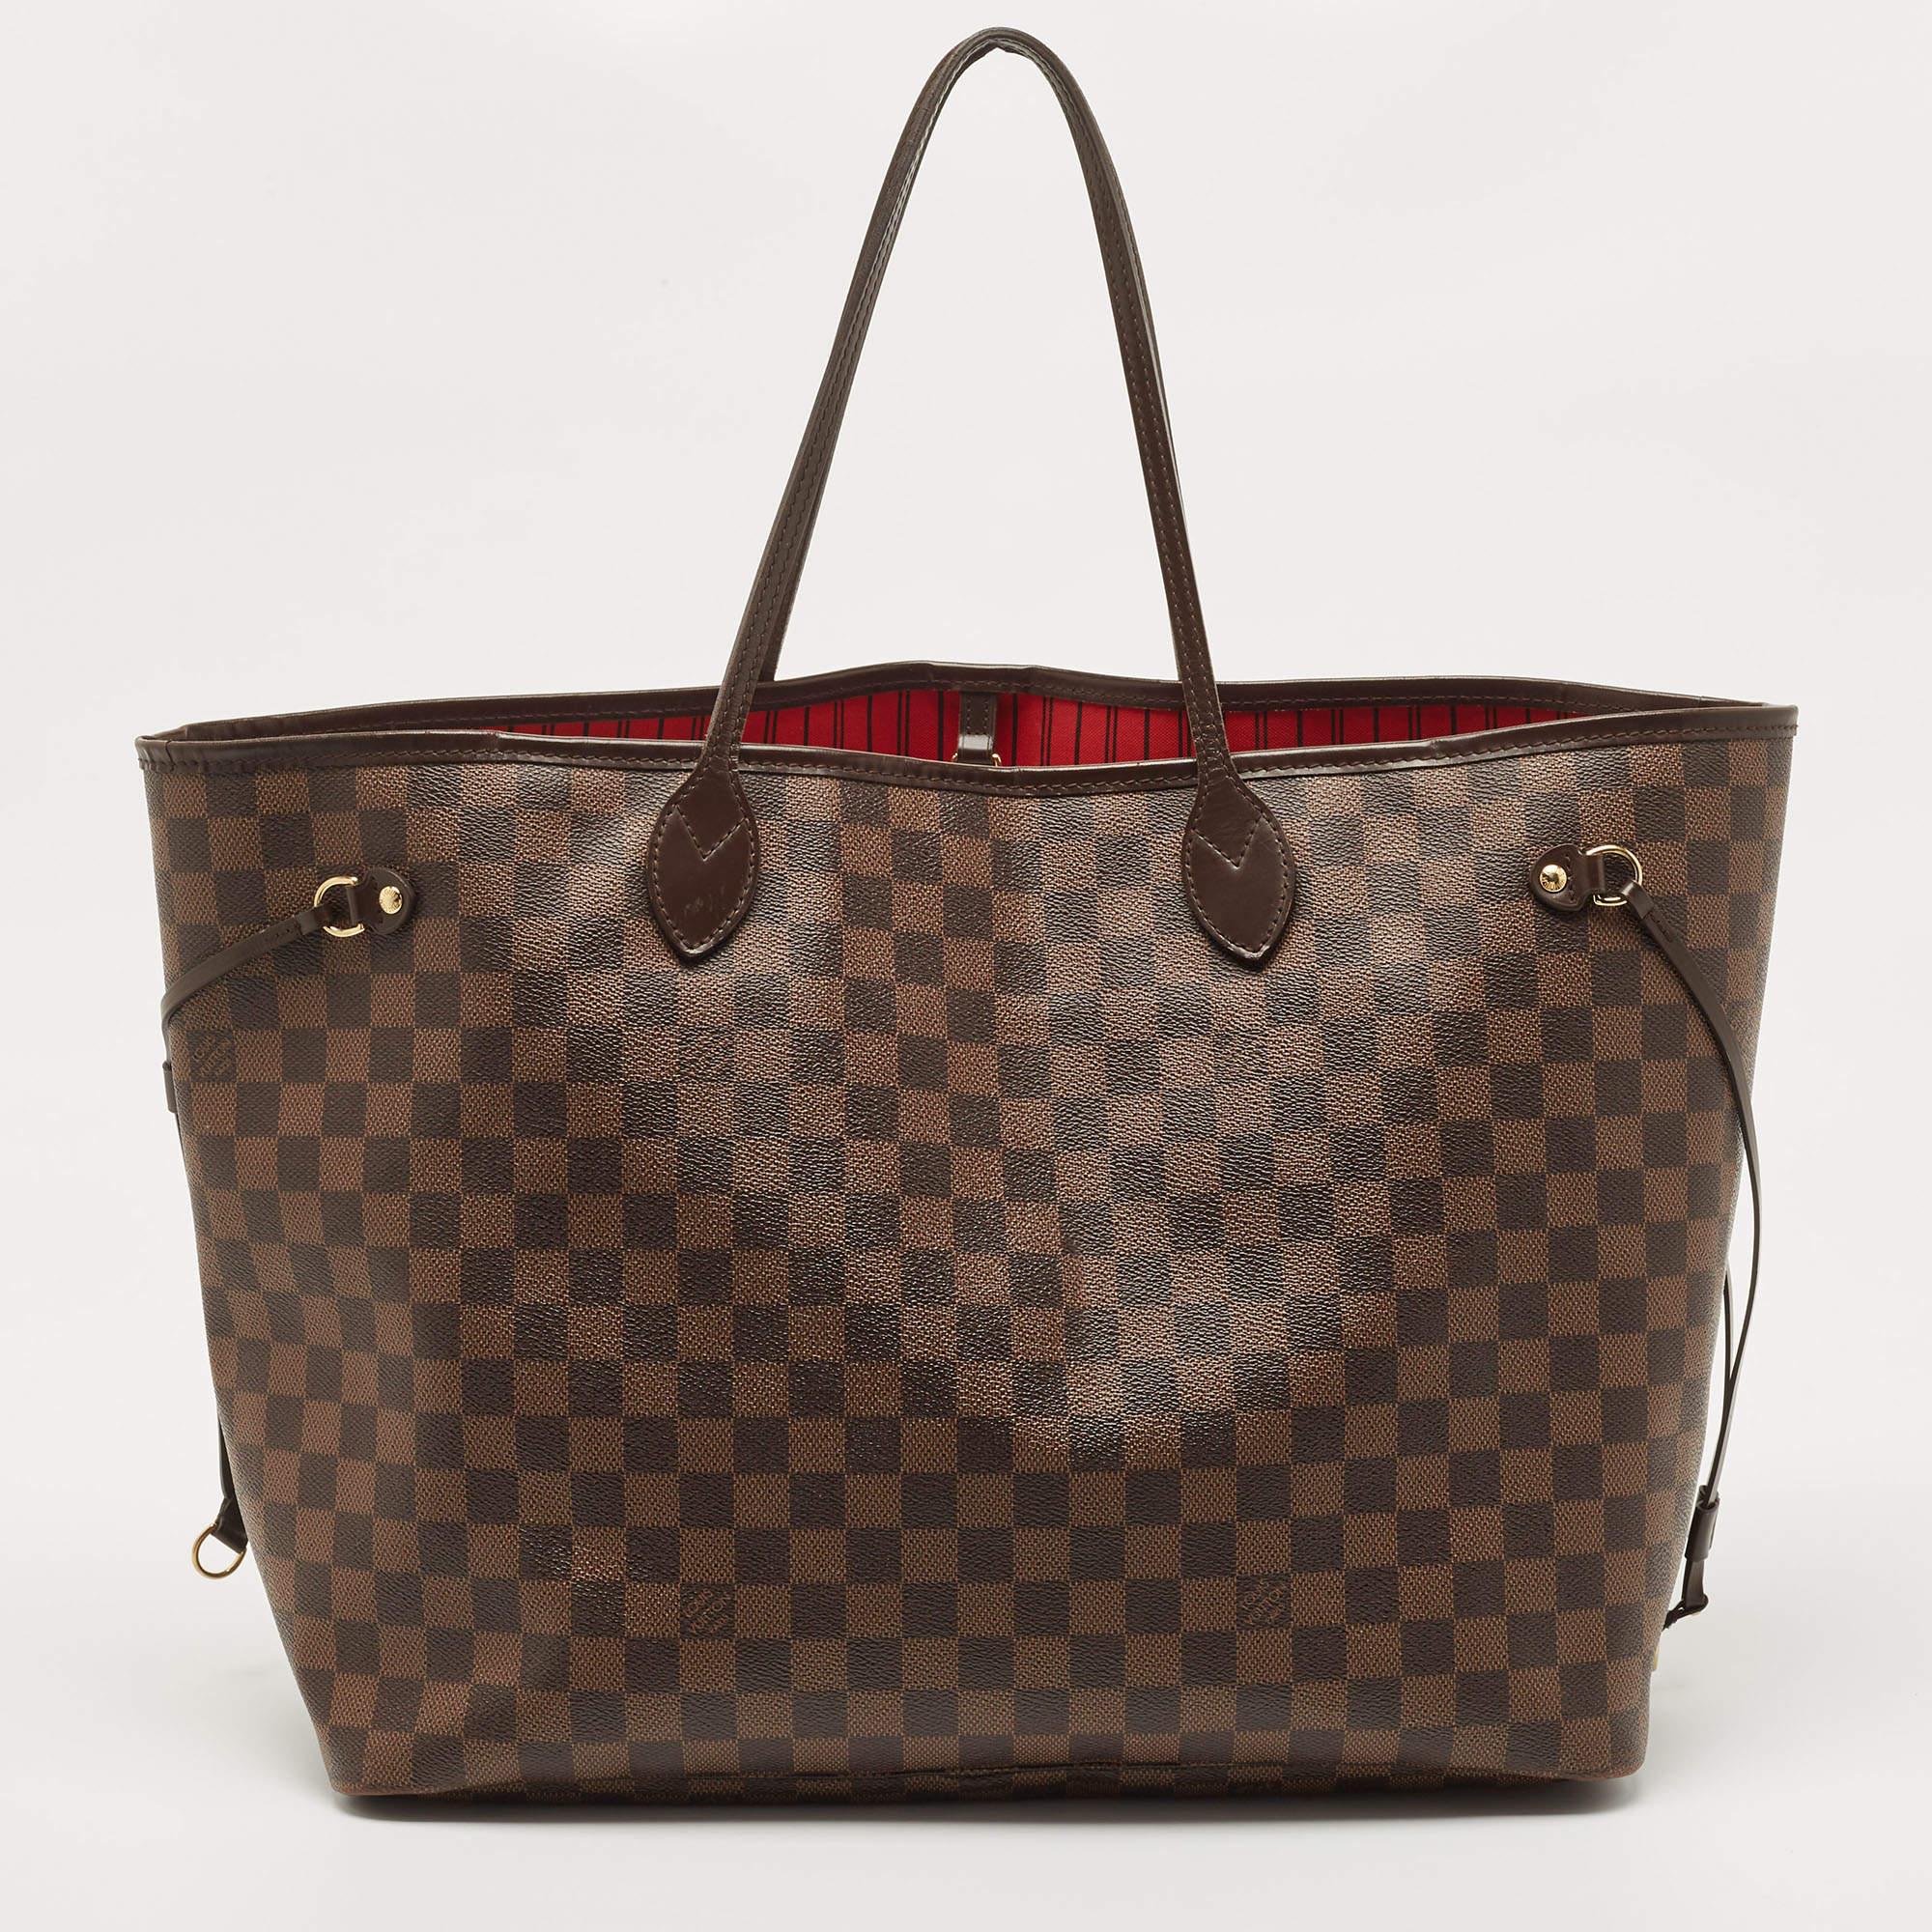 Louis Vuitton’s Neverfull was first introduced in 2007. Crafted from classic Damier Ebene canvas, Neverfull is versatile in design. The bag features dual top handles and a fabric-lined spacious interior. Neverfull is the perfect everyday tote.

